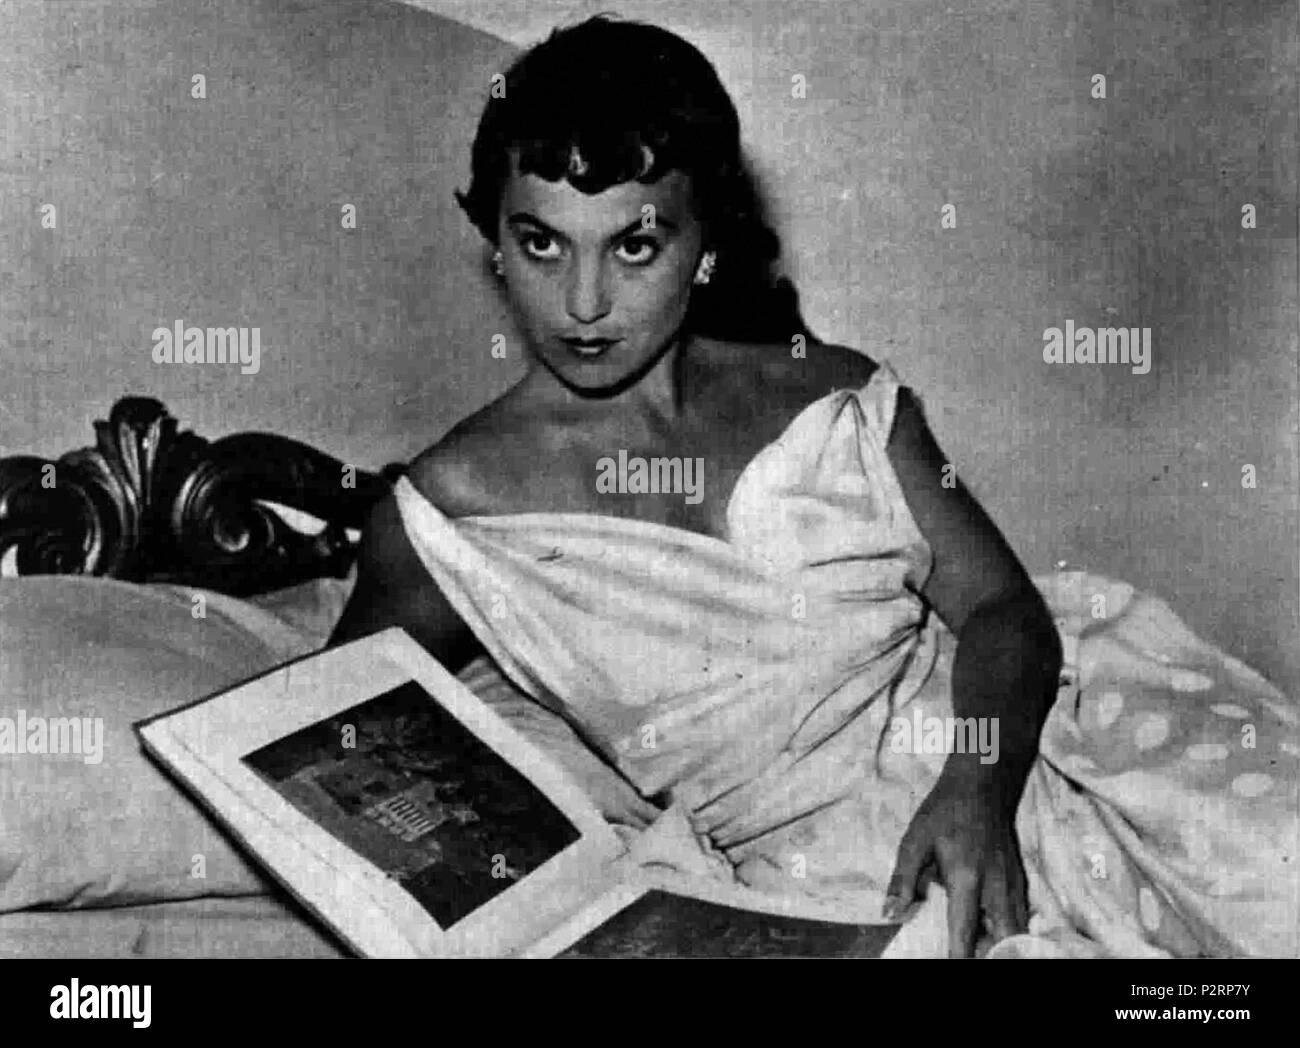 1954 actress Black and White Stock Photos & Images - Page 3 - Alamy